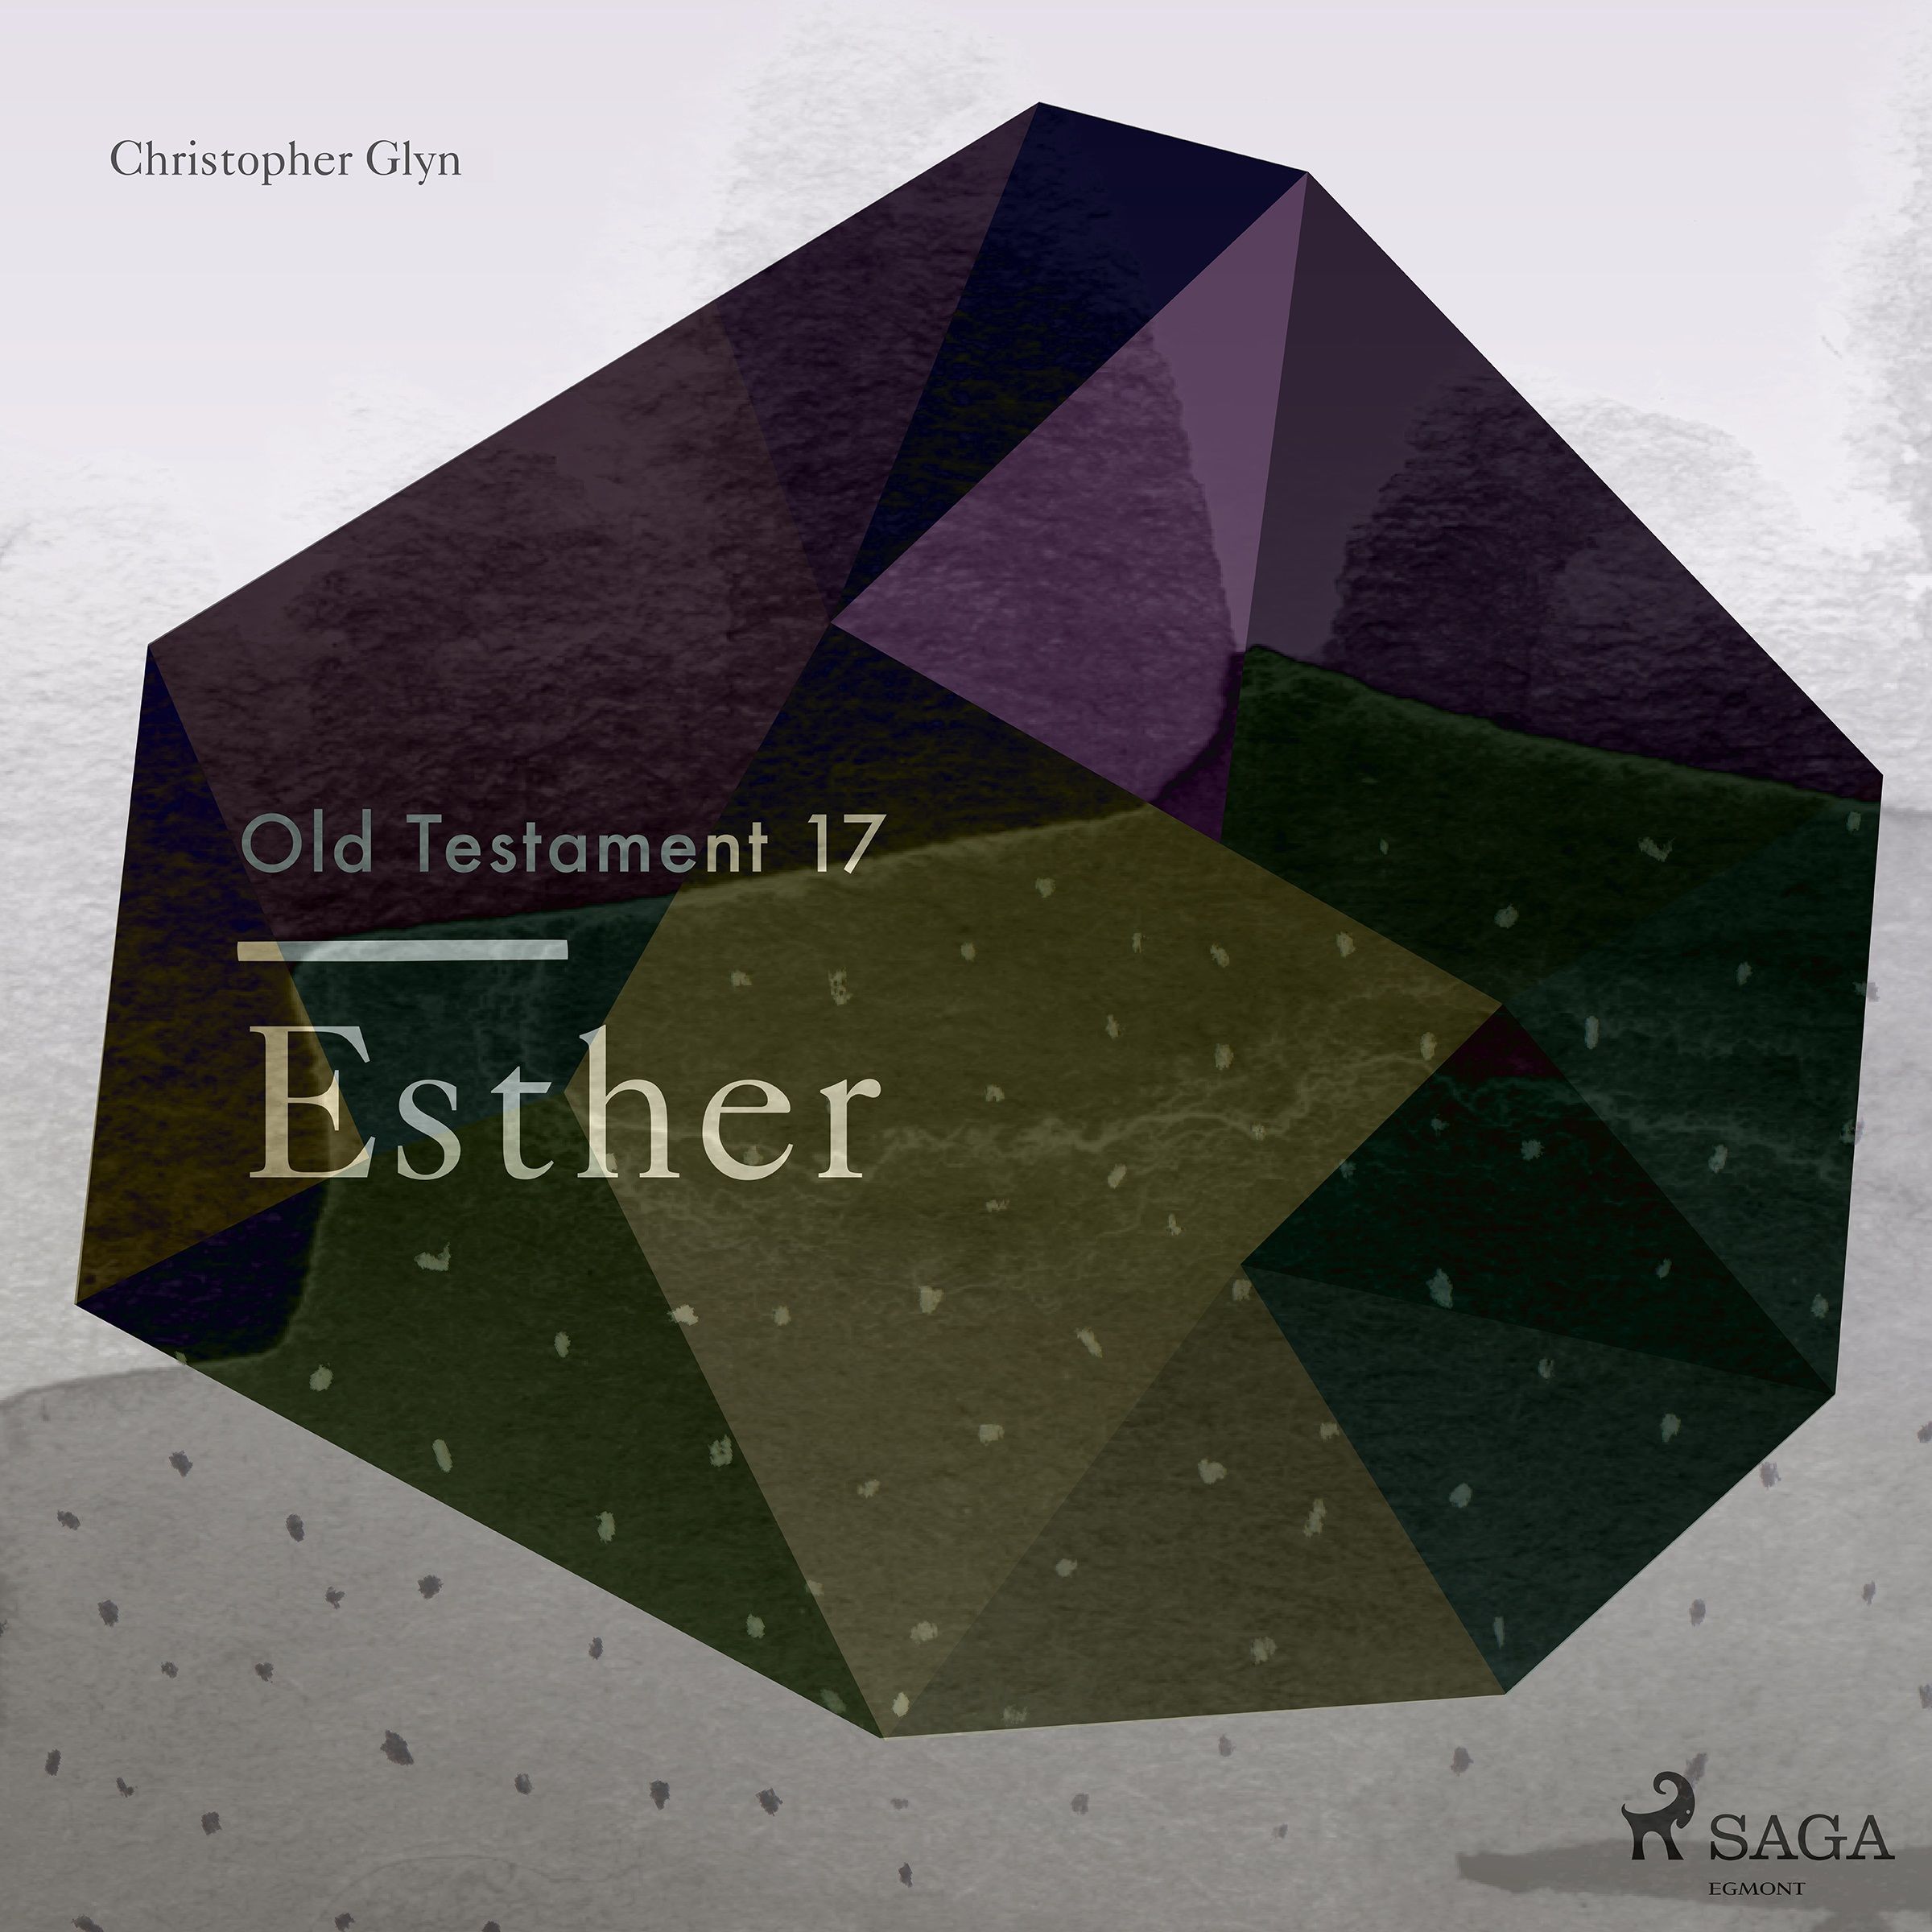 The Old Testament 17 - Esther, audiobook by Christopher Glyn